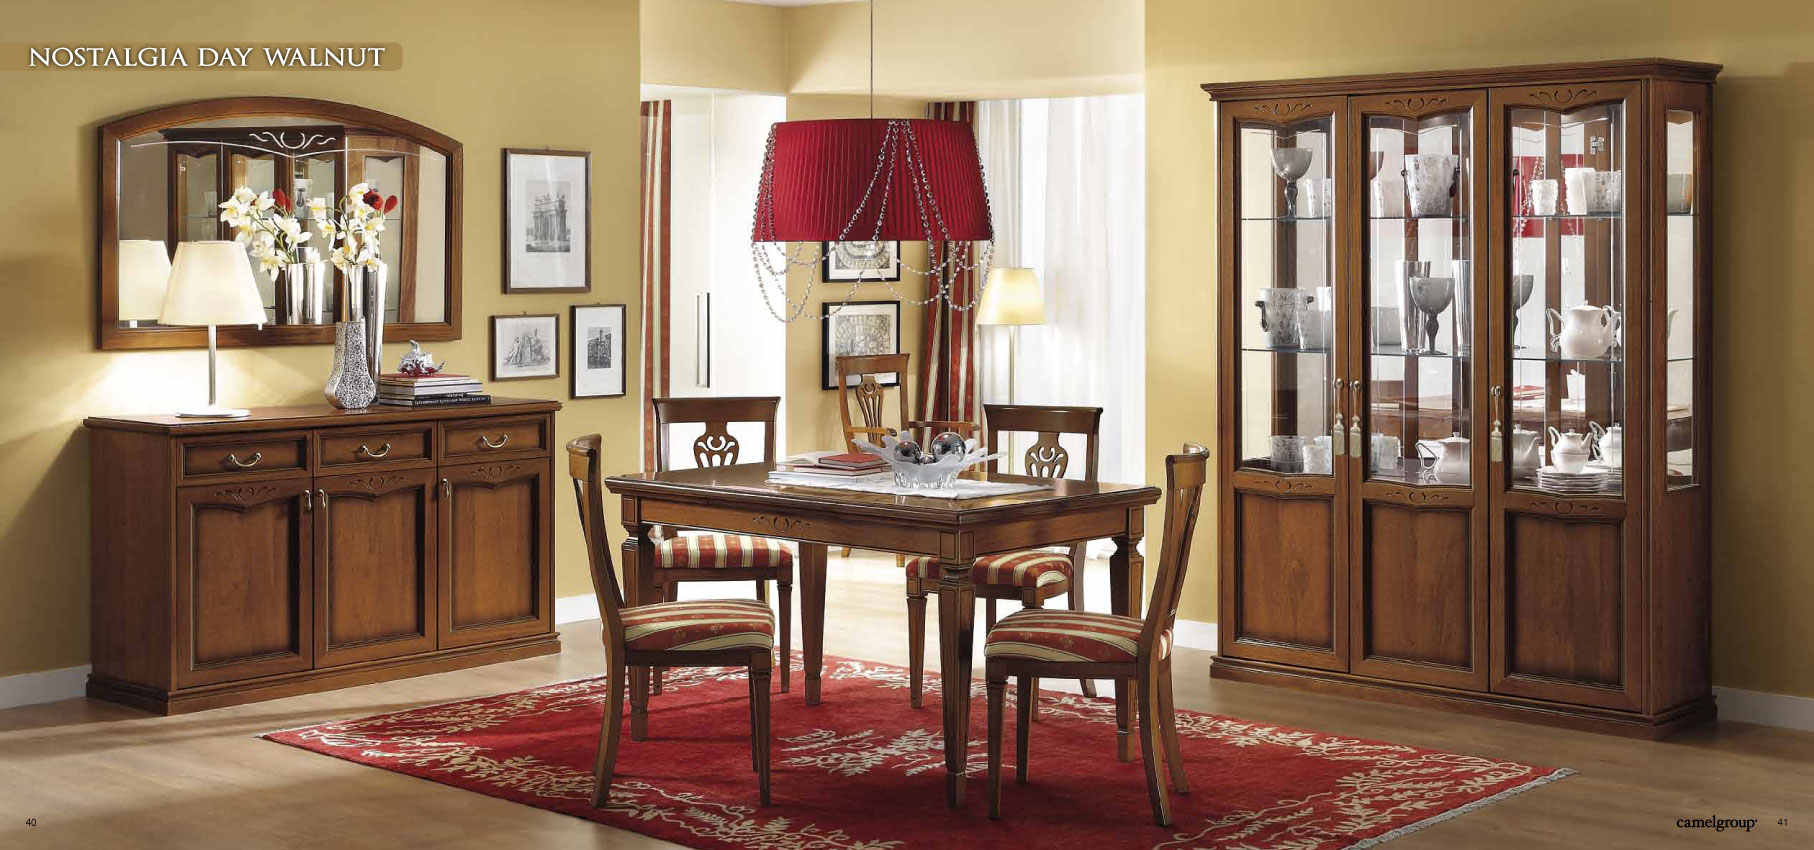 Dining Room Furniture Chairs Nostalgia Day Walnut